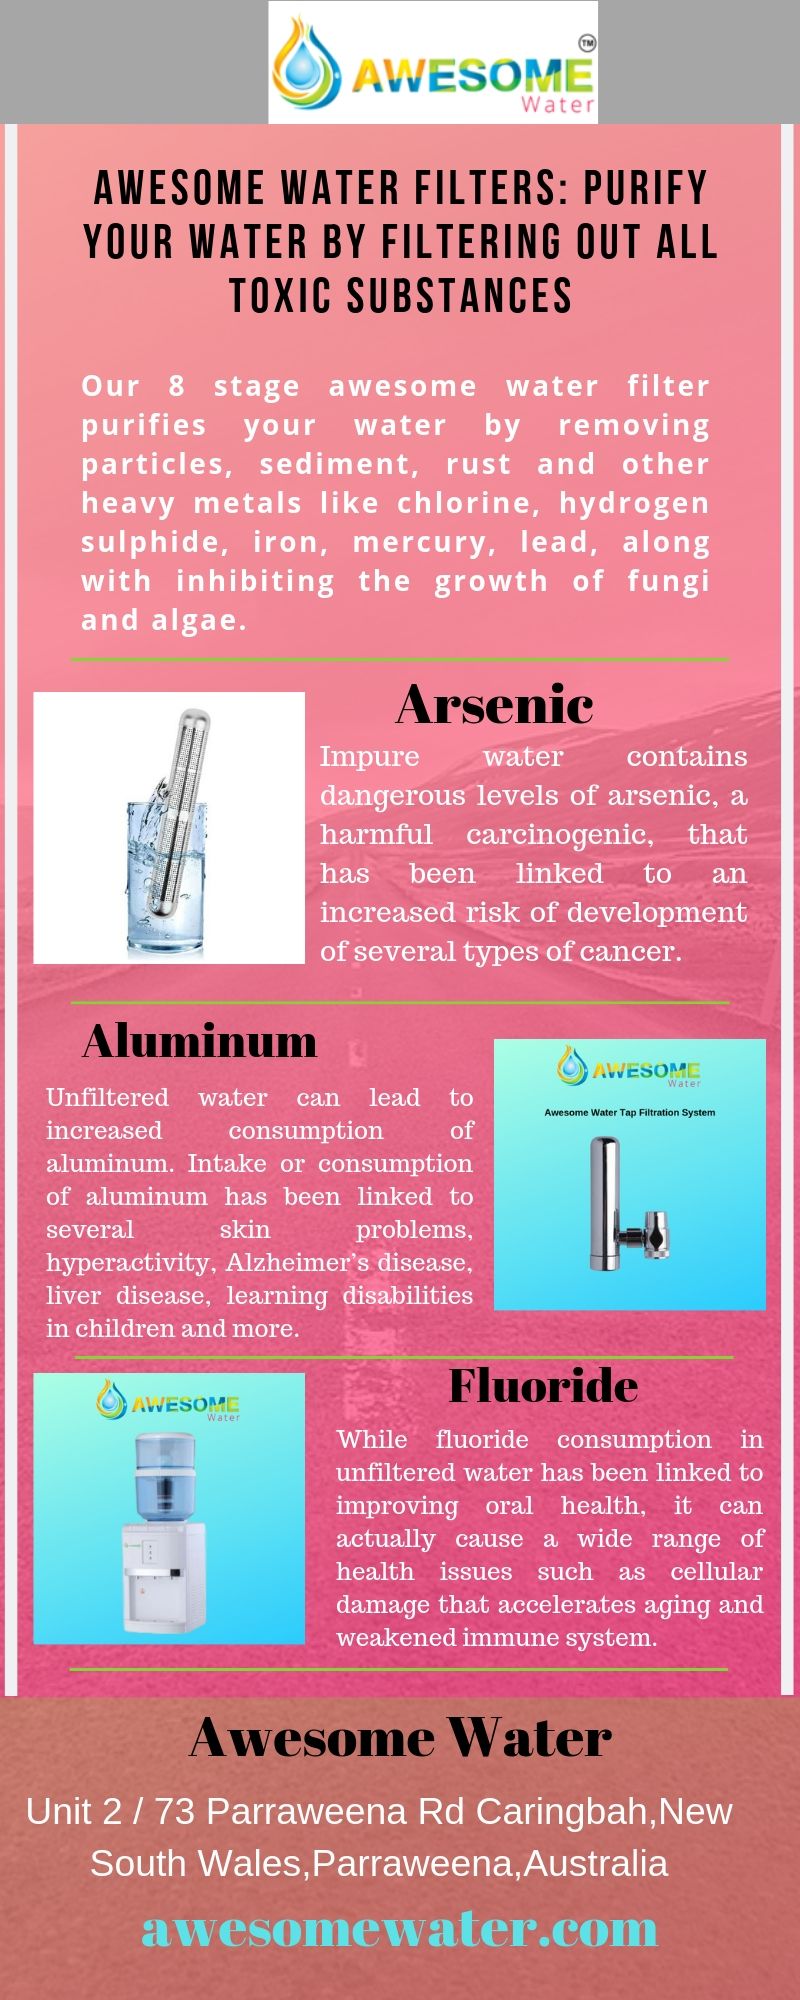 Awesome Water Filters: Purify Your Water by Filtering Out All Toxic Substances Water purifiers contain different types of filters but what kind of contaminant does each type filter out? Why our 8 stage water filter is the best choice for your home and office? For more details visit: https://bit.ly/2XptxoC
 by awesomewater